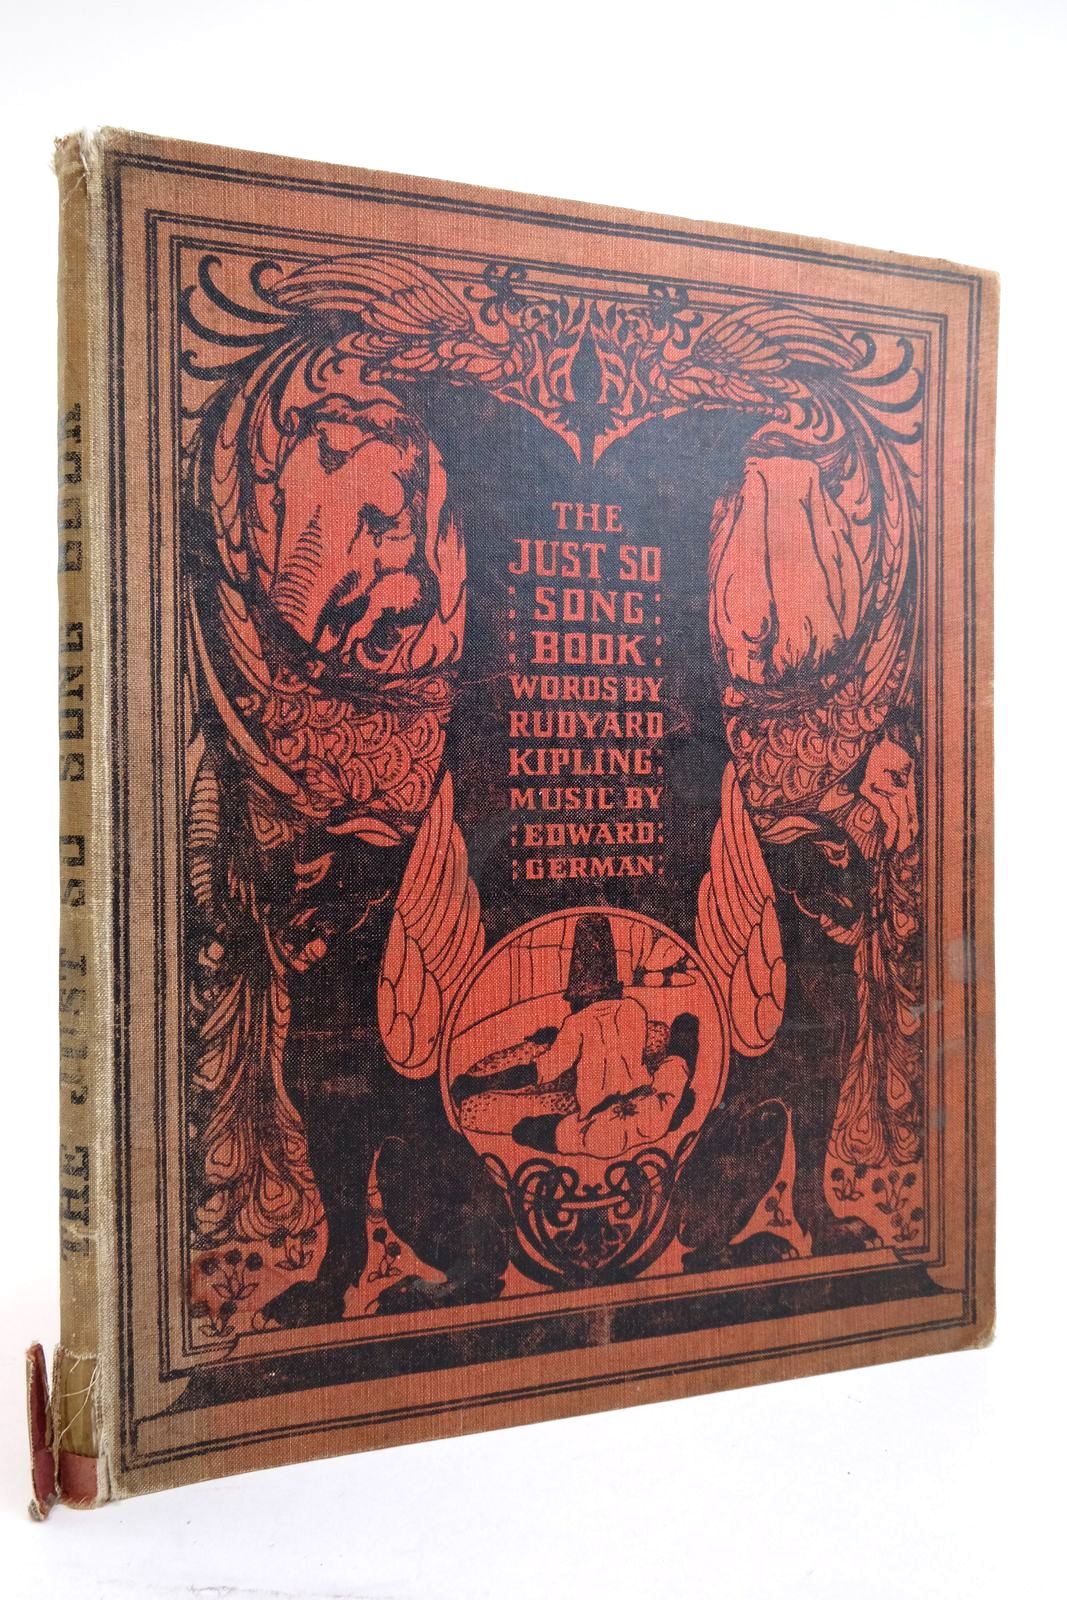 Photo of THE JUST SO SONG BOOK written by Kipling, Rudyard German, Edward published by Macmillan &amp; Co. Ltd. (STOCK CODE: 2135894)  for sale by Stella & Rose's Books